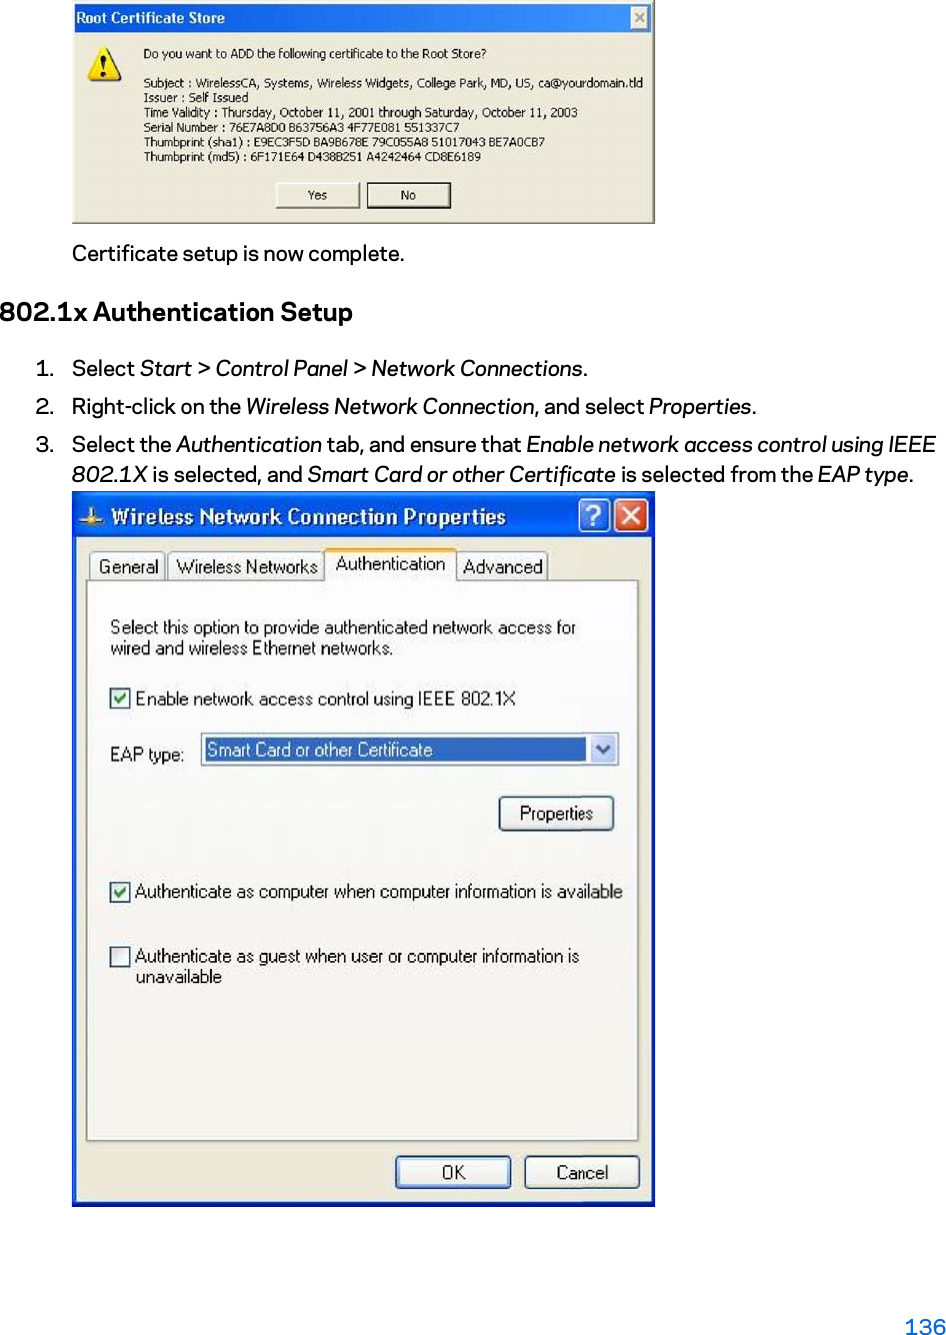 Certificate setup is now complete. 802.1x Authentication Setup 1. Select Start &gt; Control Panel &gt; Network Connections. 2. Right-click on the Wireless Network Connection, and select Properties.  3. Select the Authentication tab, and ensure that Enable network access control using IEEE 802.1X is selected, and Smart Card or other Certificate is selected from the EAP type. 136